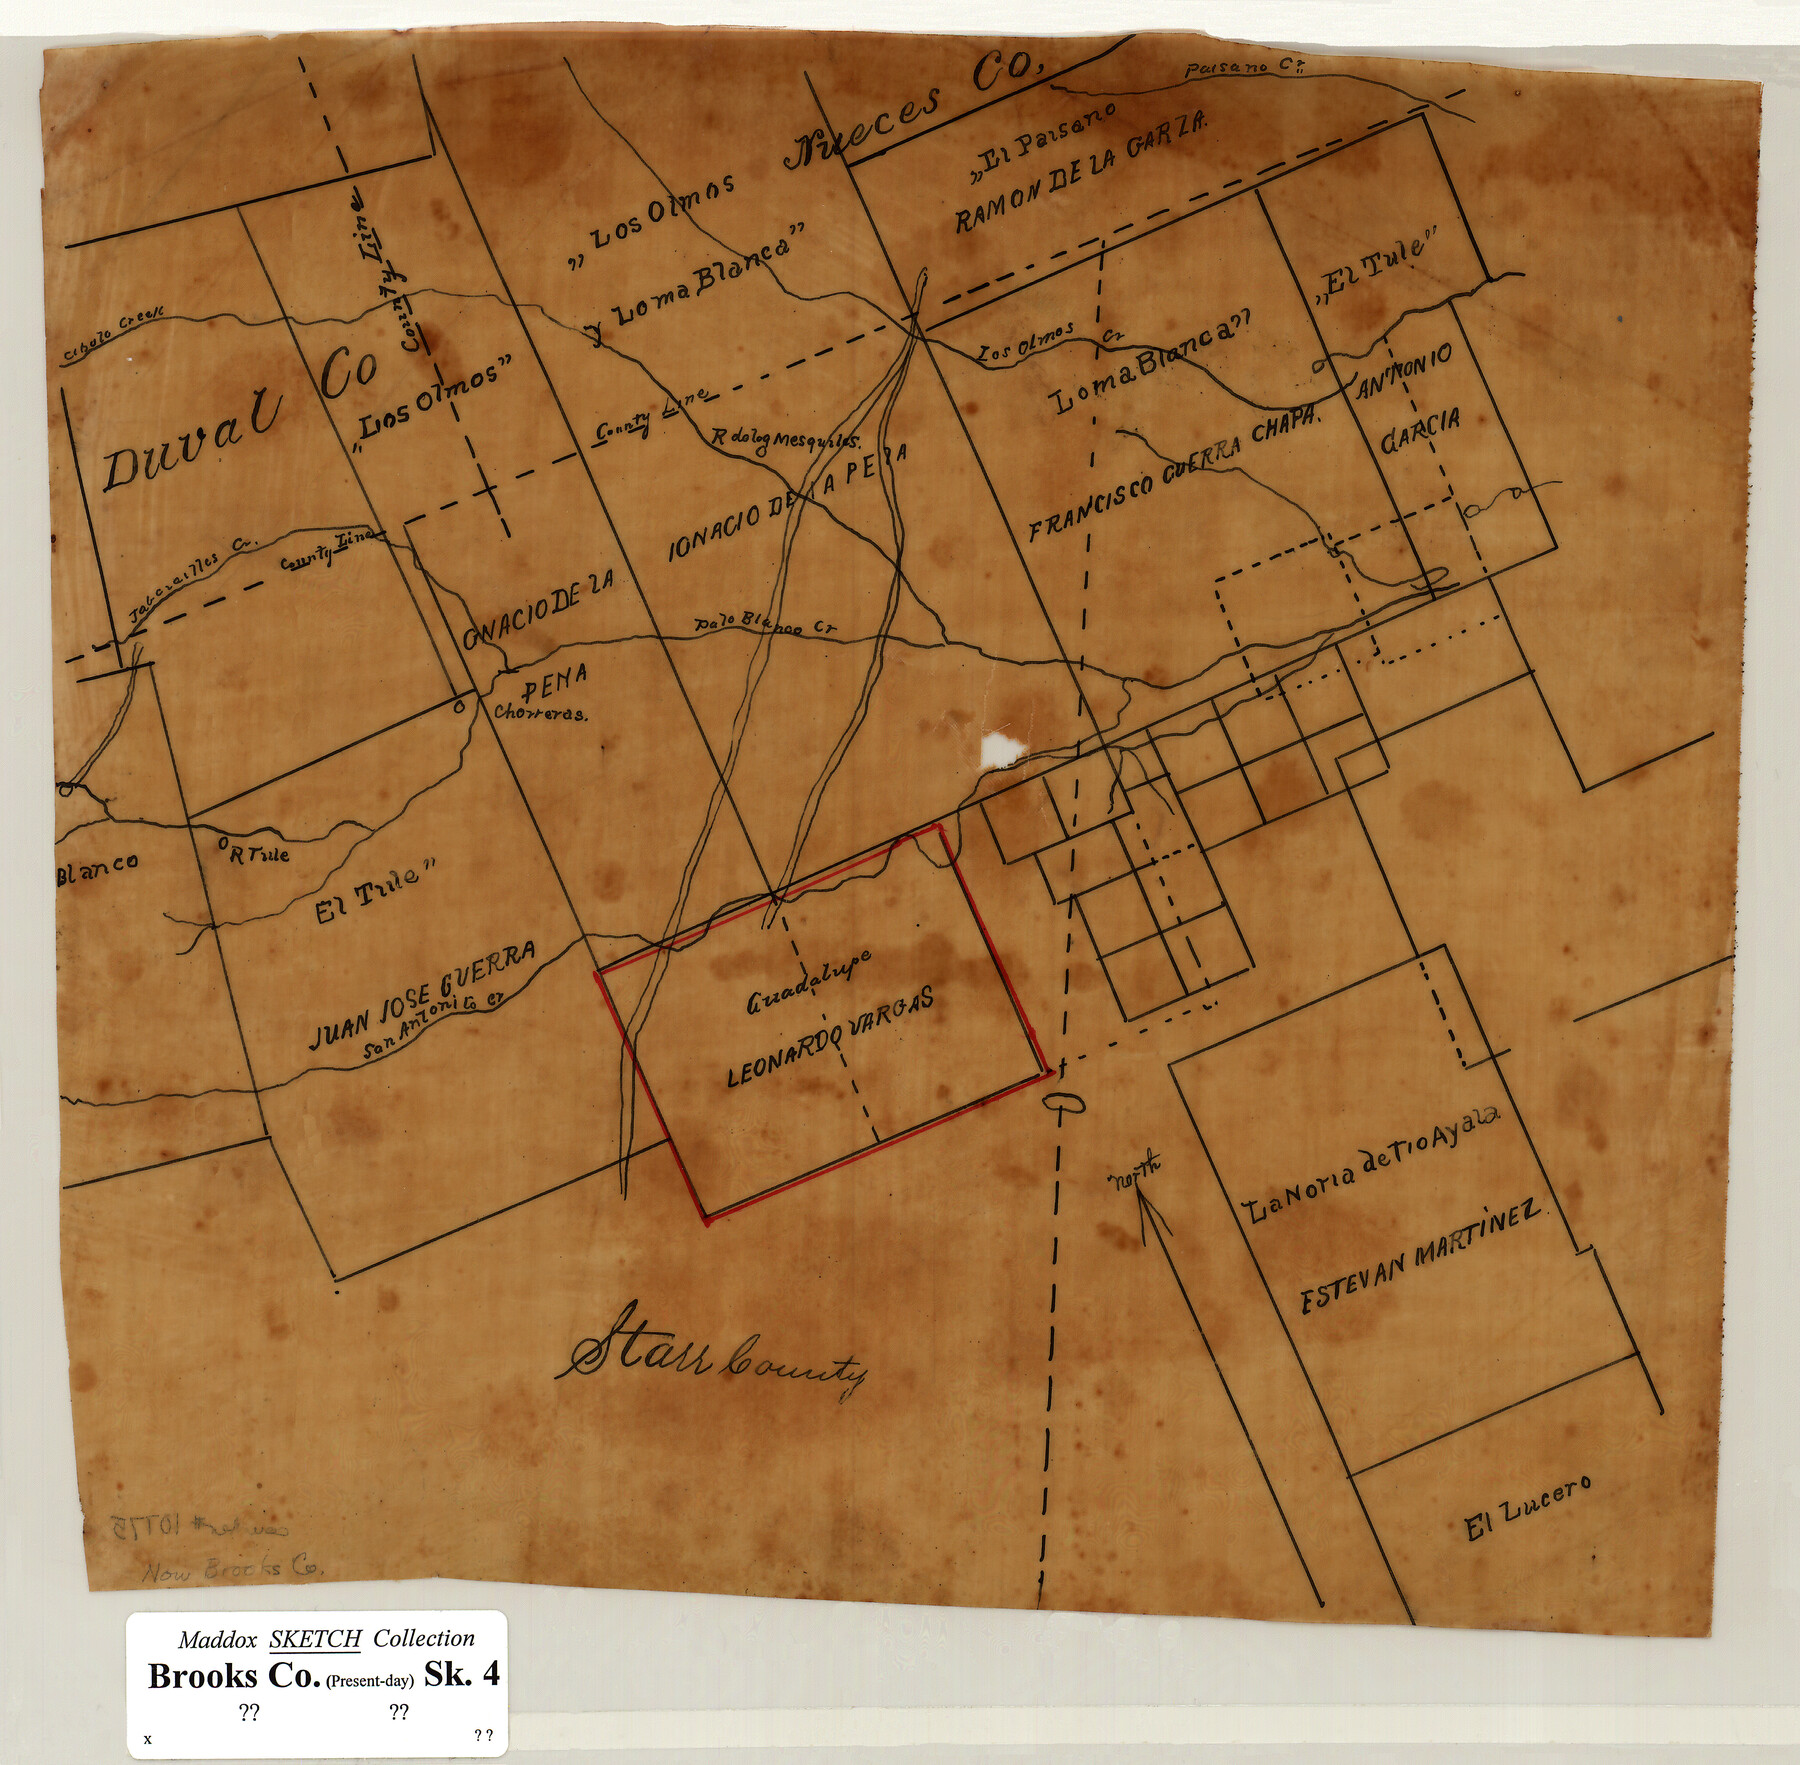 10775, [Sketch of Surveys in Brooks County, Texas], Maddox Collection